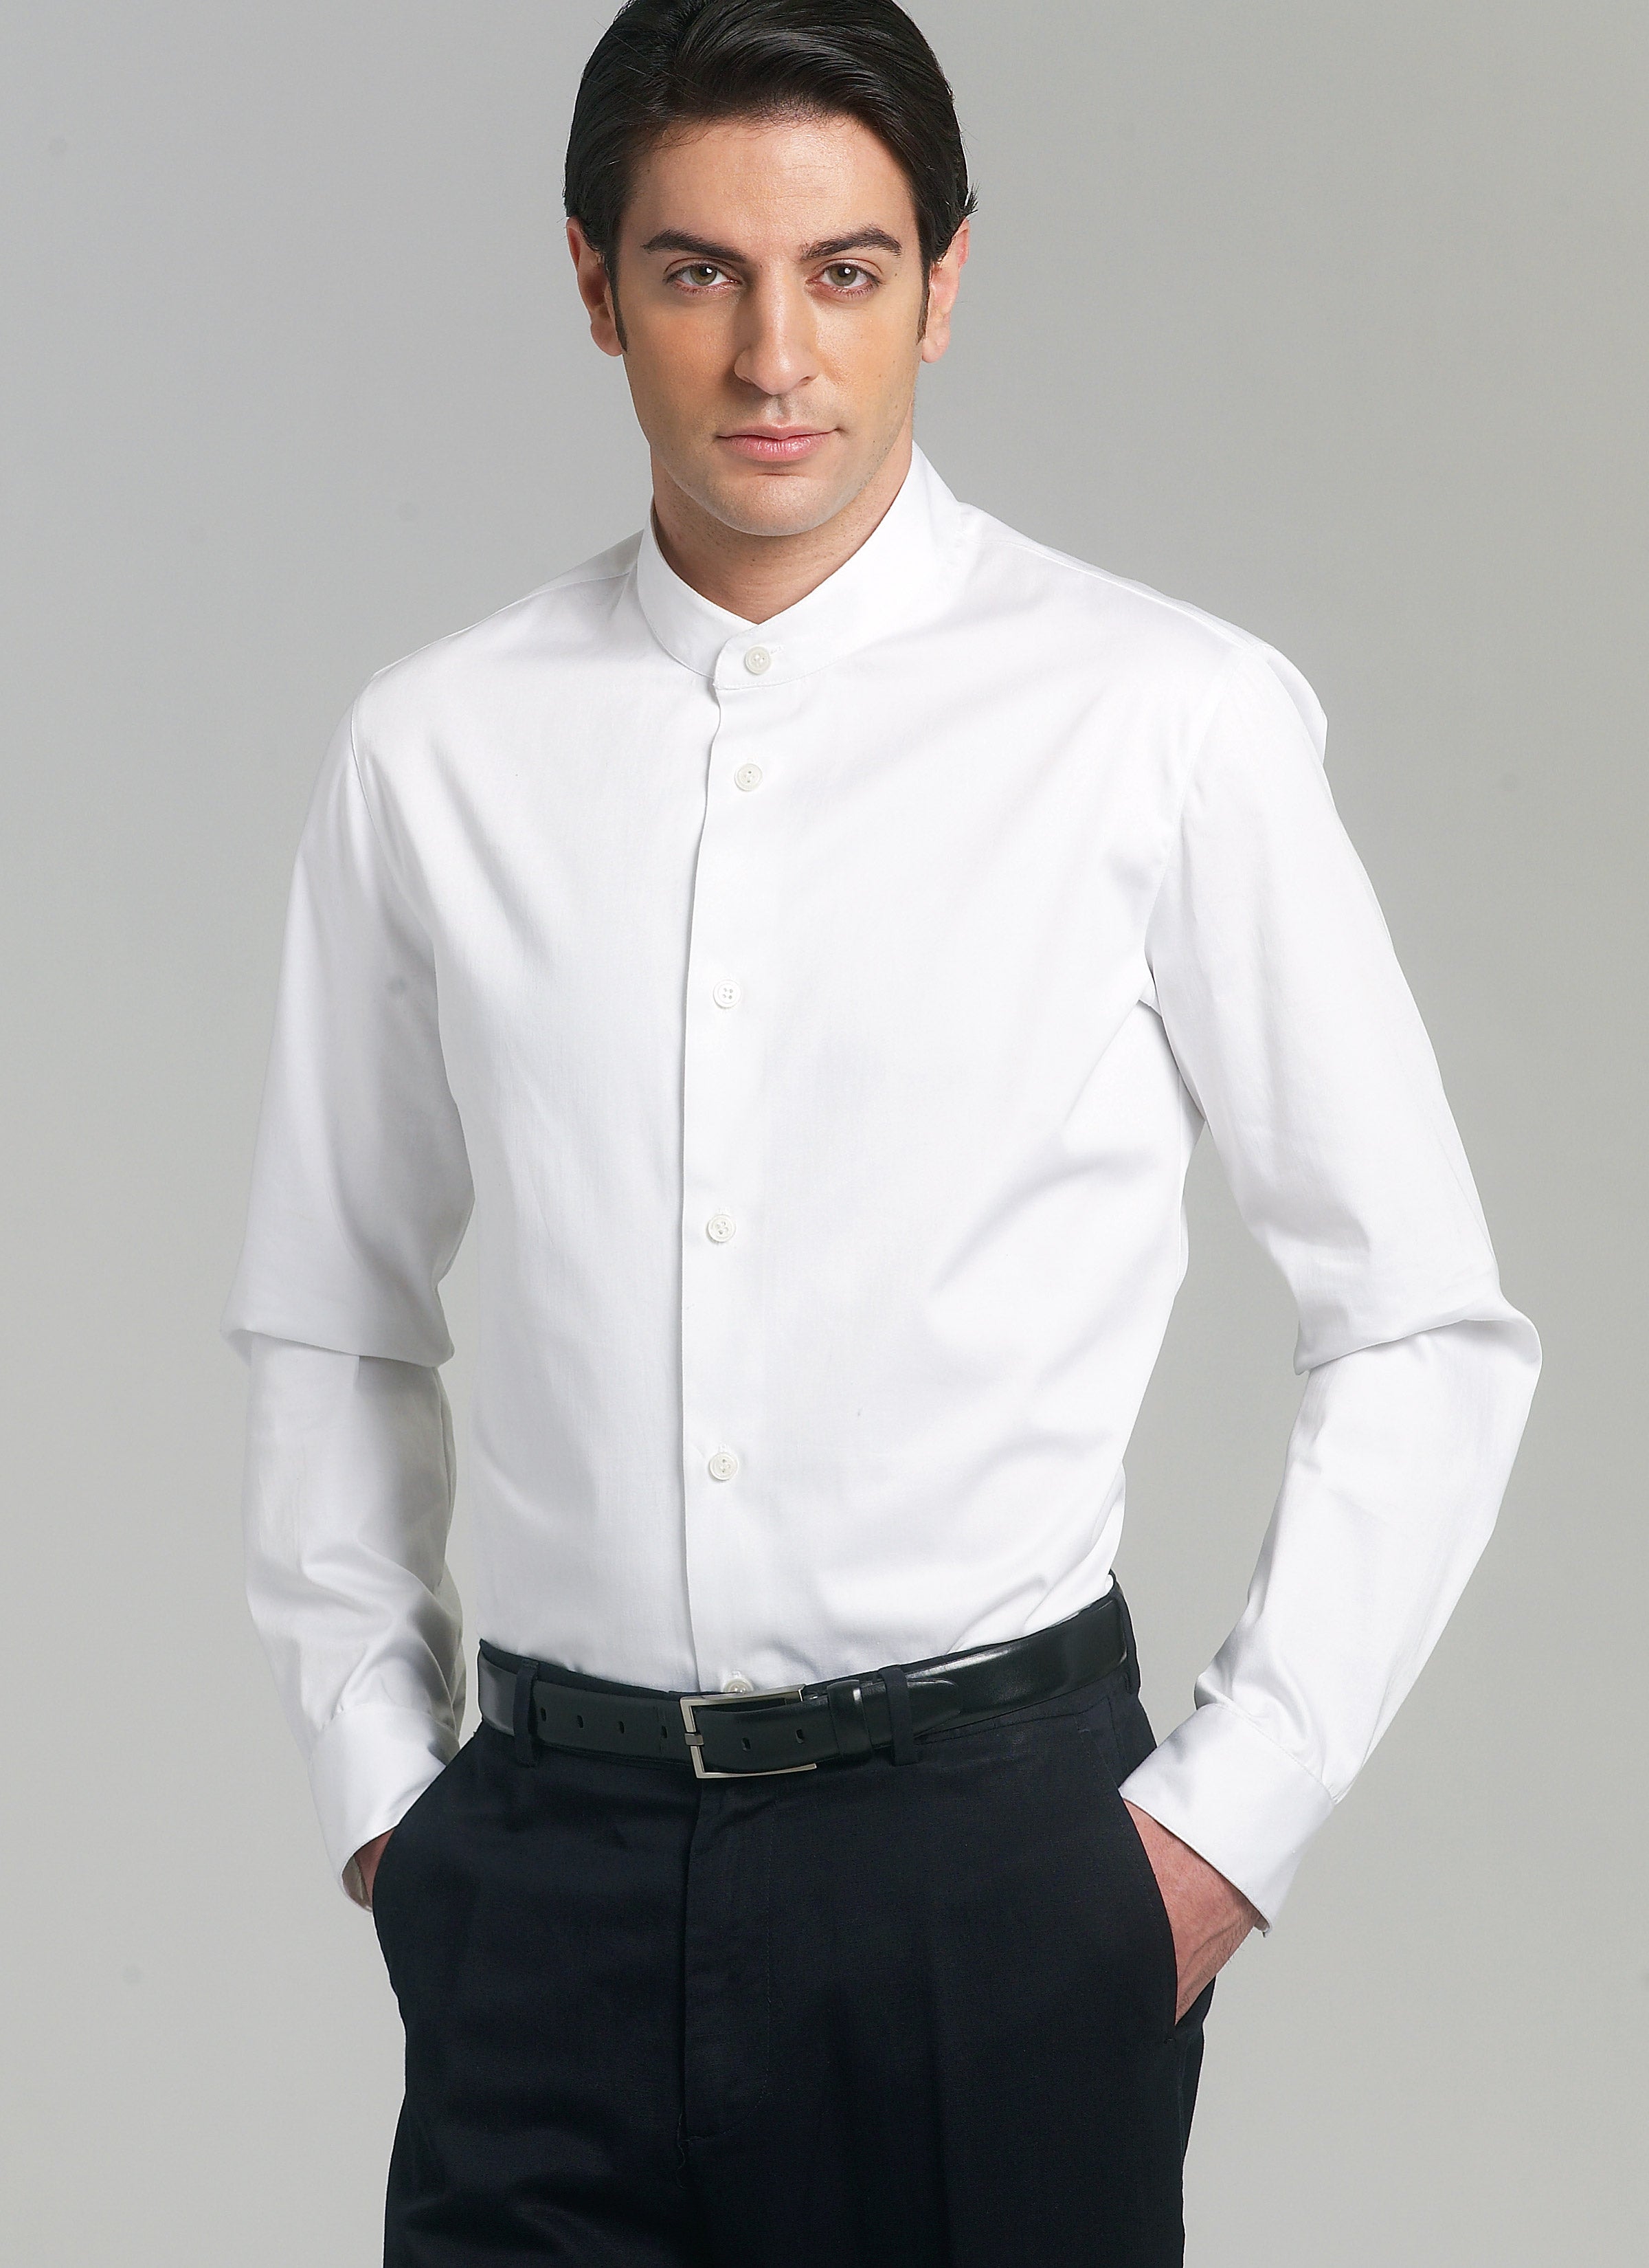 Vogue Pattern 8759 Men's Shirt | Easy from Jaycotts Sewing Supplies